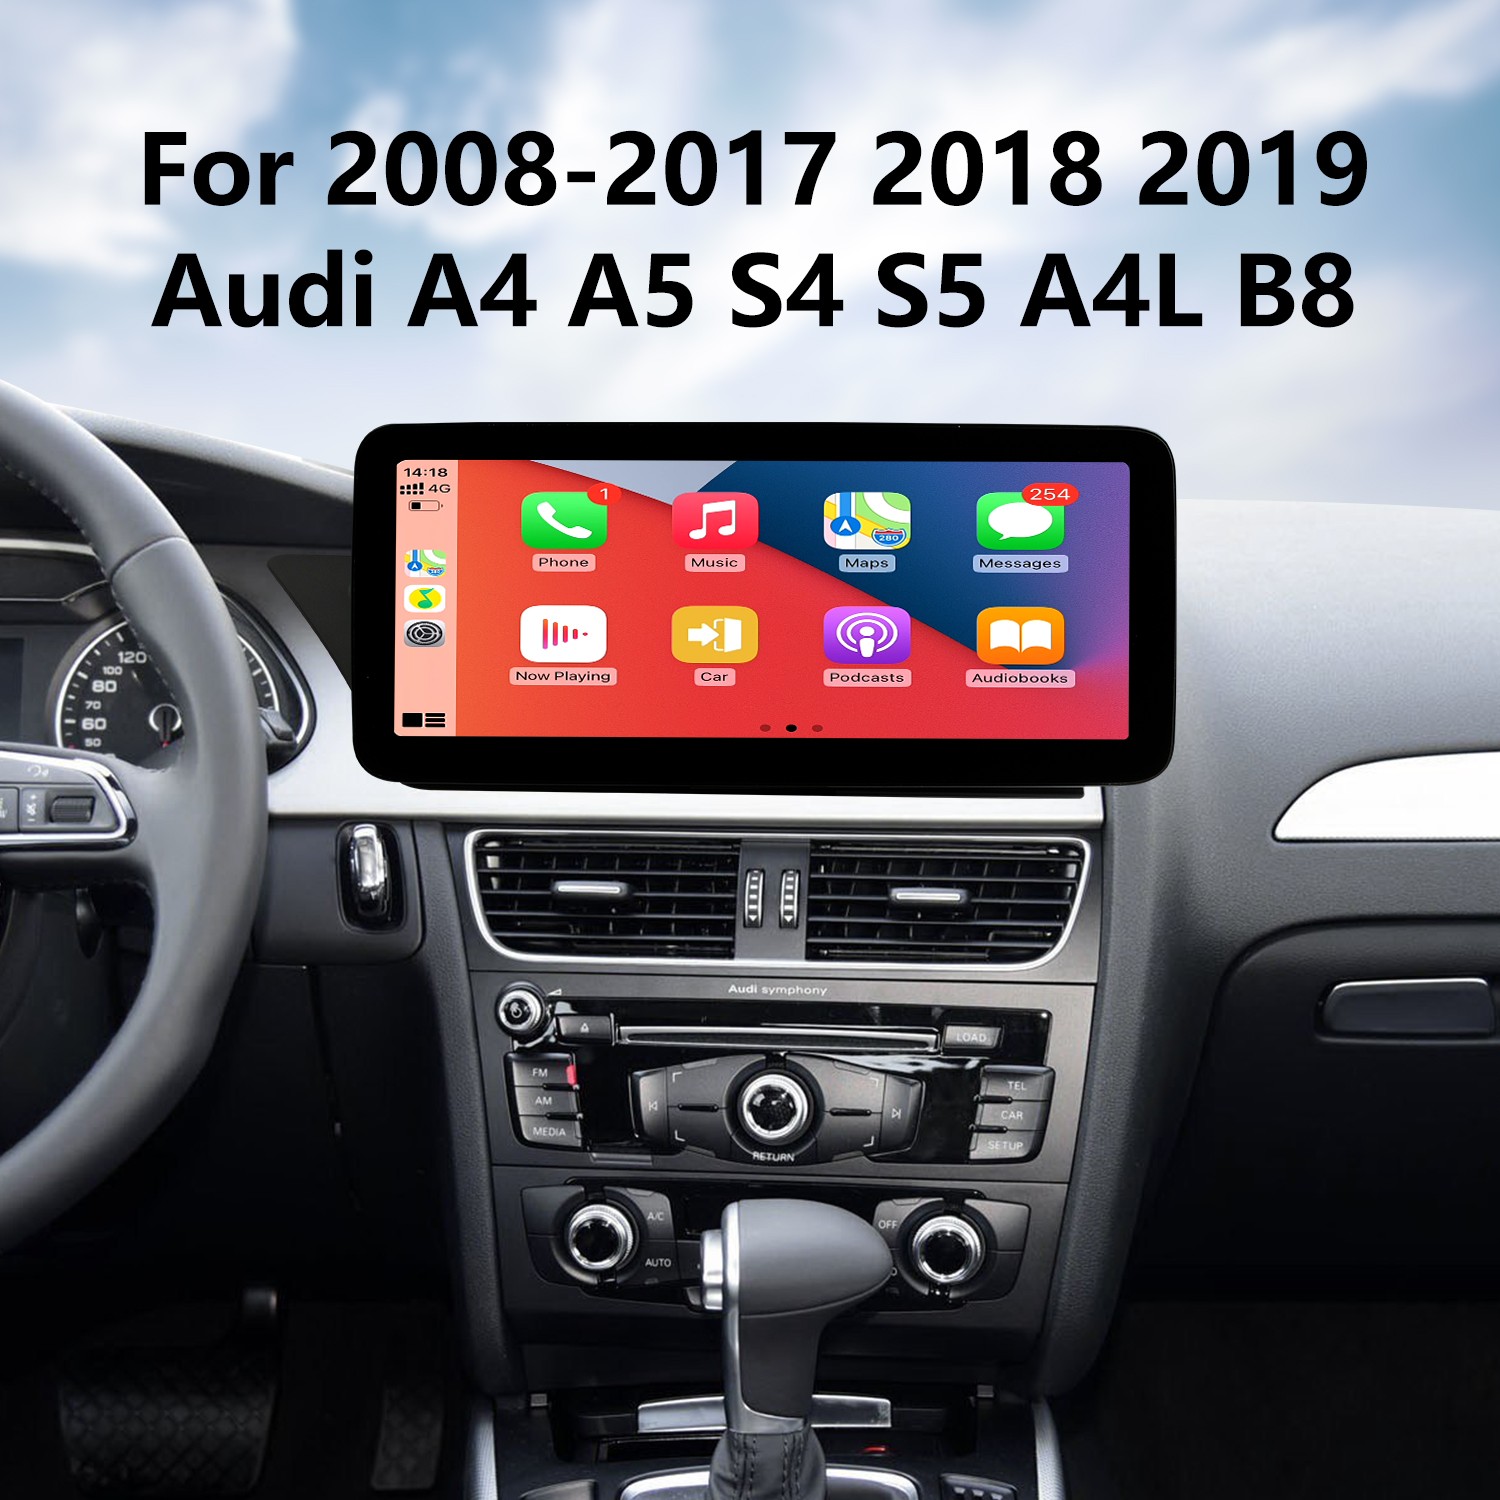 HD Touchscreen 12.3 inch Android 11.0 GPS Navigation Radio for 2008-2017  2018 2019 Audi A4 A5 S4 S5 A4L B8 with Bluetooth AUX support DVR Carplay  OBD